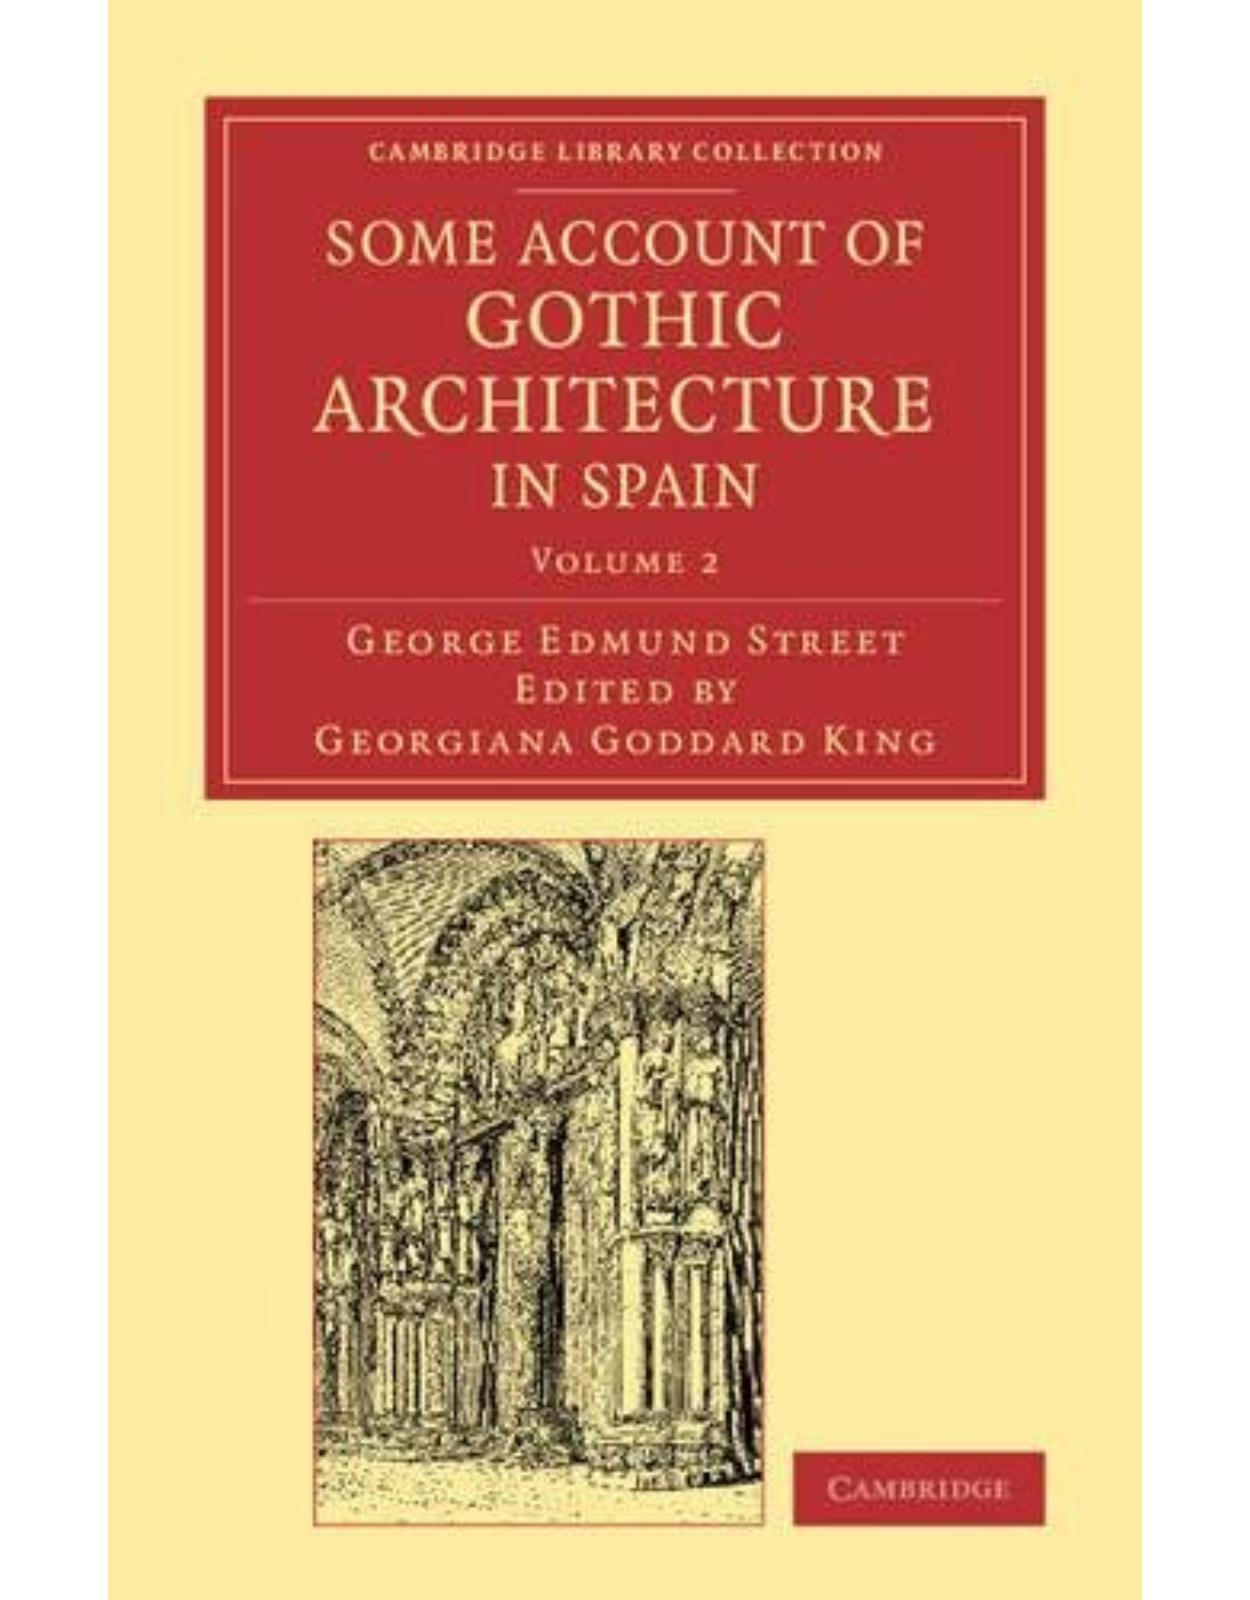 Some Account of Gothic Architecture in Spain: Volume 2 (Cambridge Library Collection - Art and Architecture)